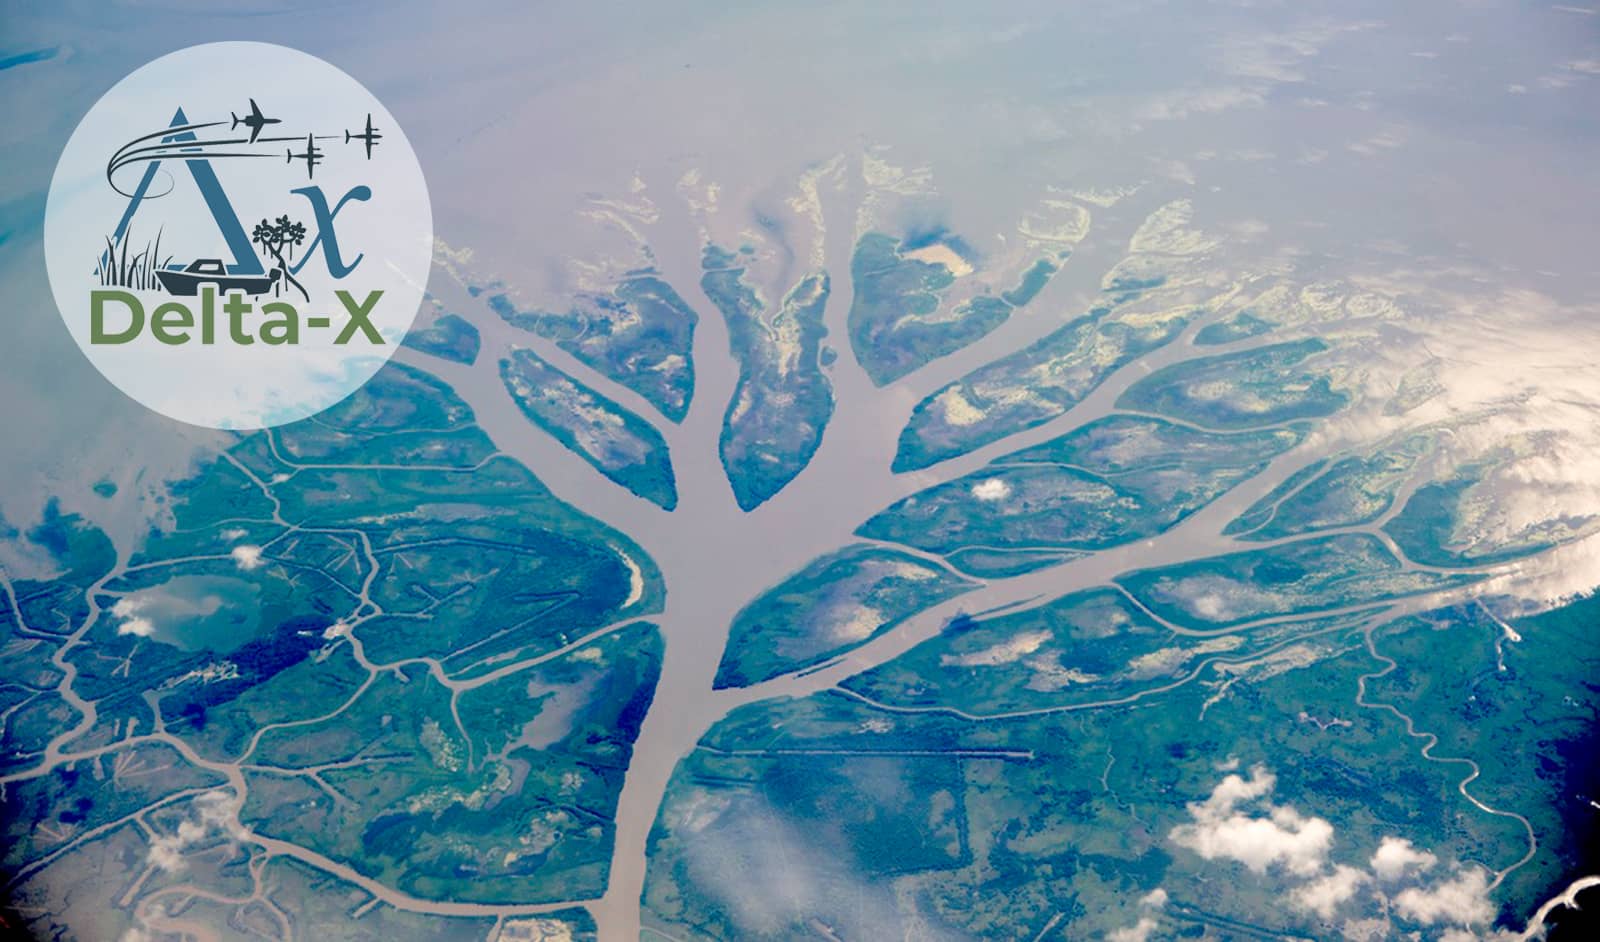 Delta-X logo with triangle, X, boats, aircraft, and vegetation in a white circle overlaid over an airborne photo of the Wax Lake Delta emptying out into the ocean